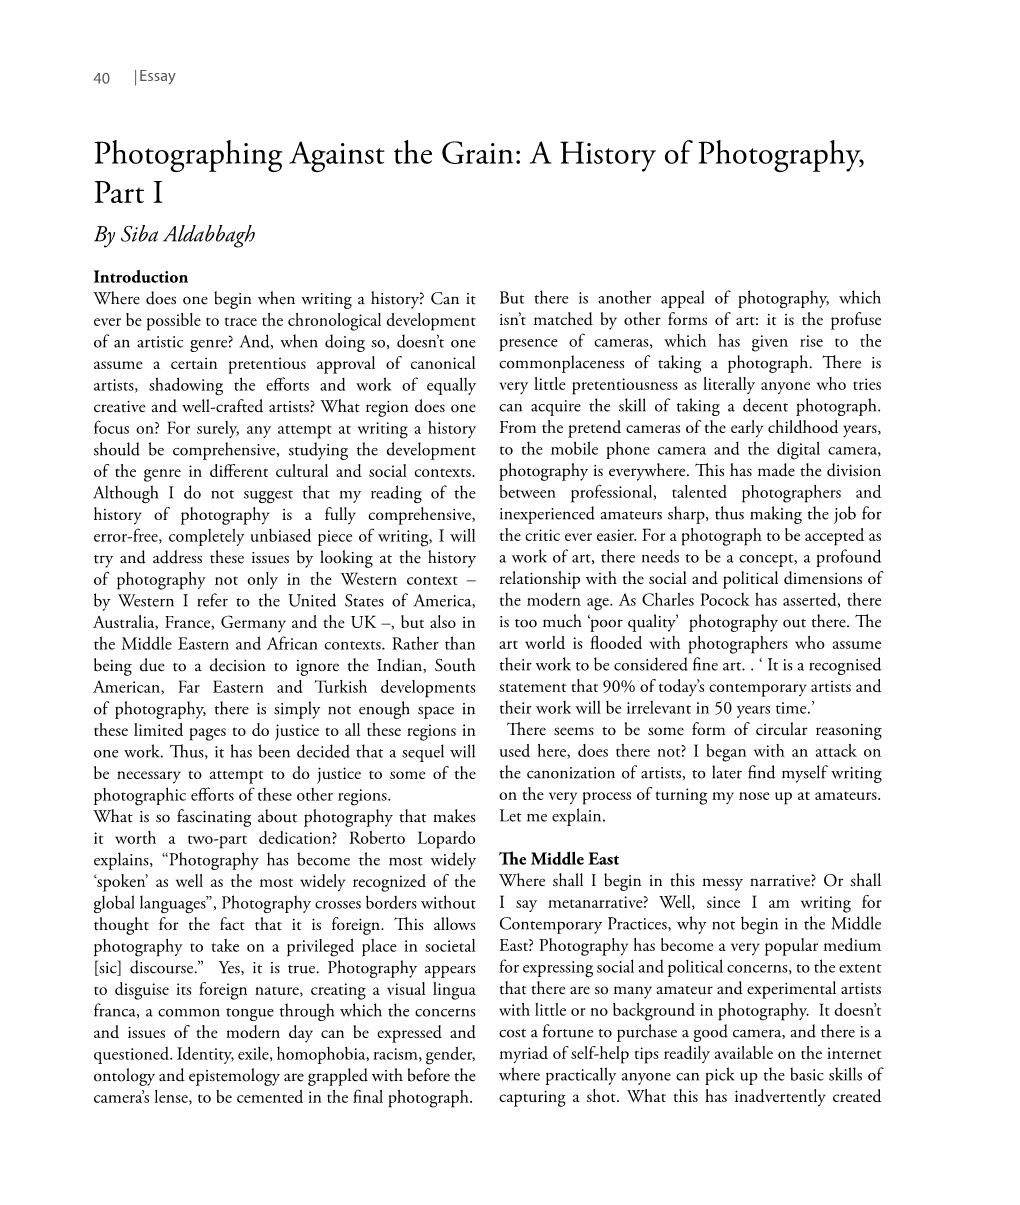 Photographing Against the Grain: a History of Photography, Part I by Siba Aldabbagh